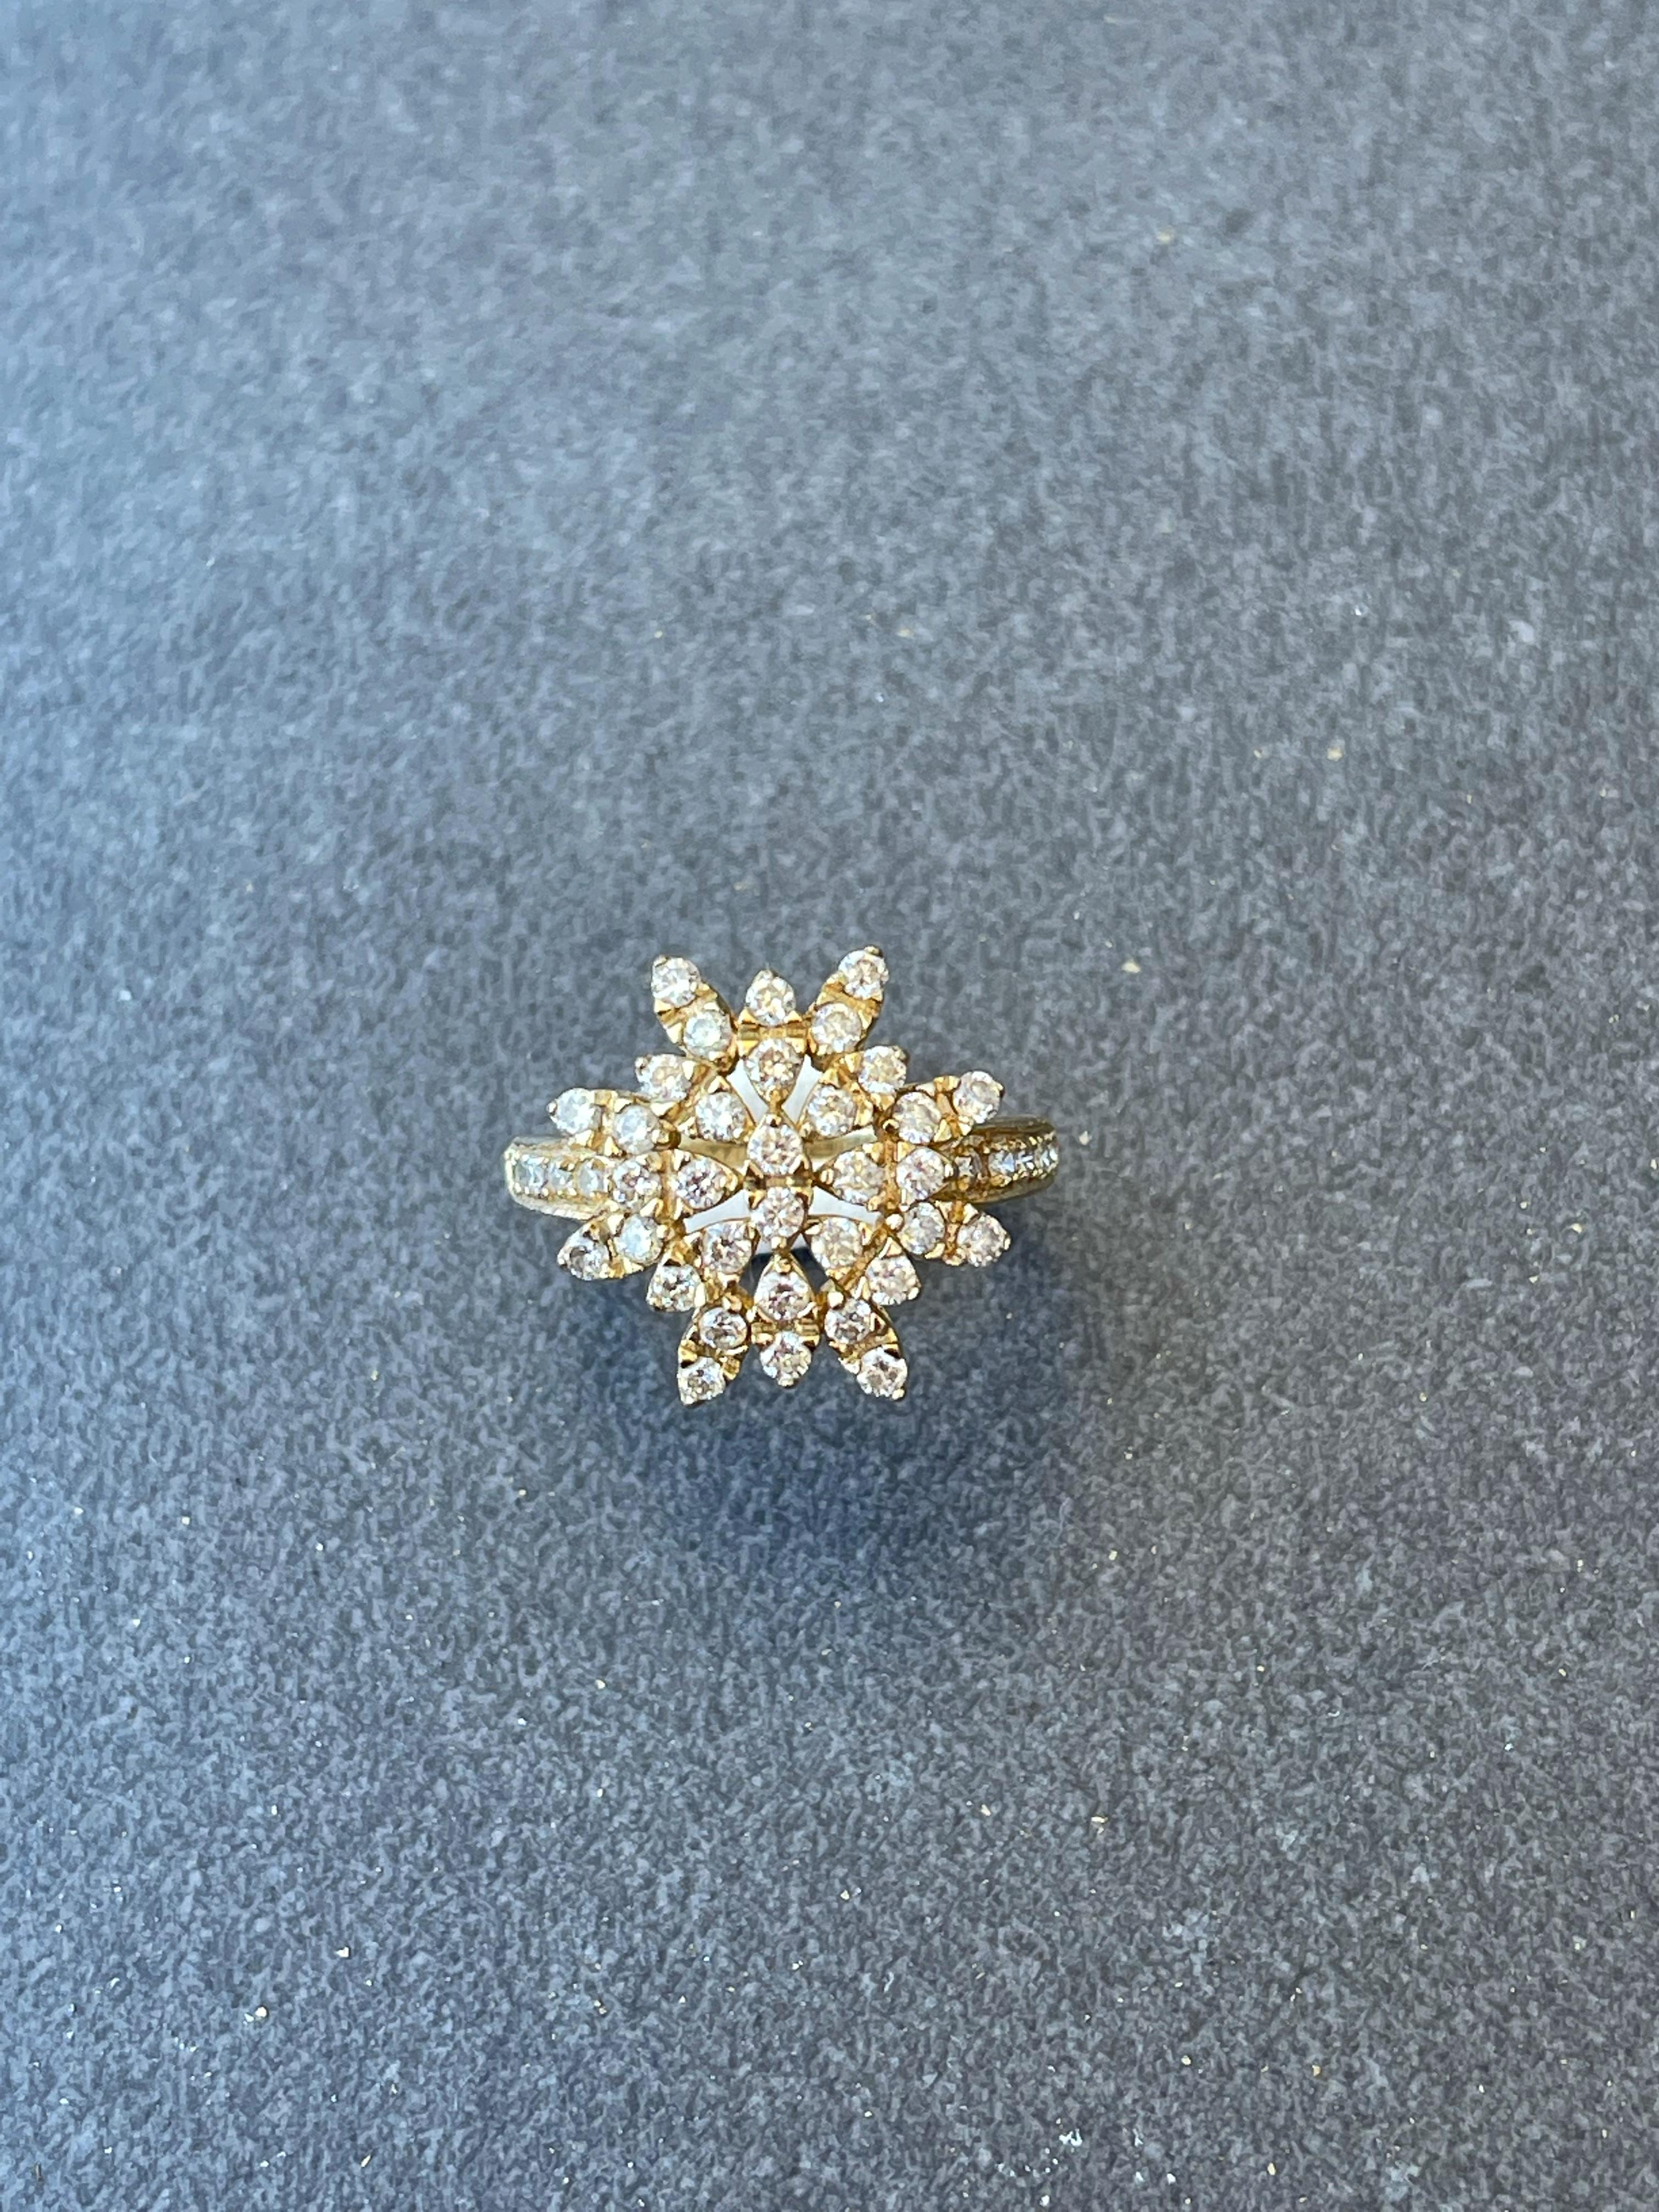 Brilliant Cut AIG Certified Sun Shaped Diamonds Gold Cocktail Engagement Ring  For Sale